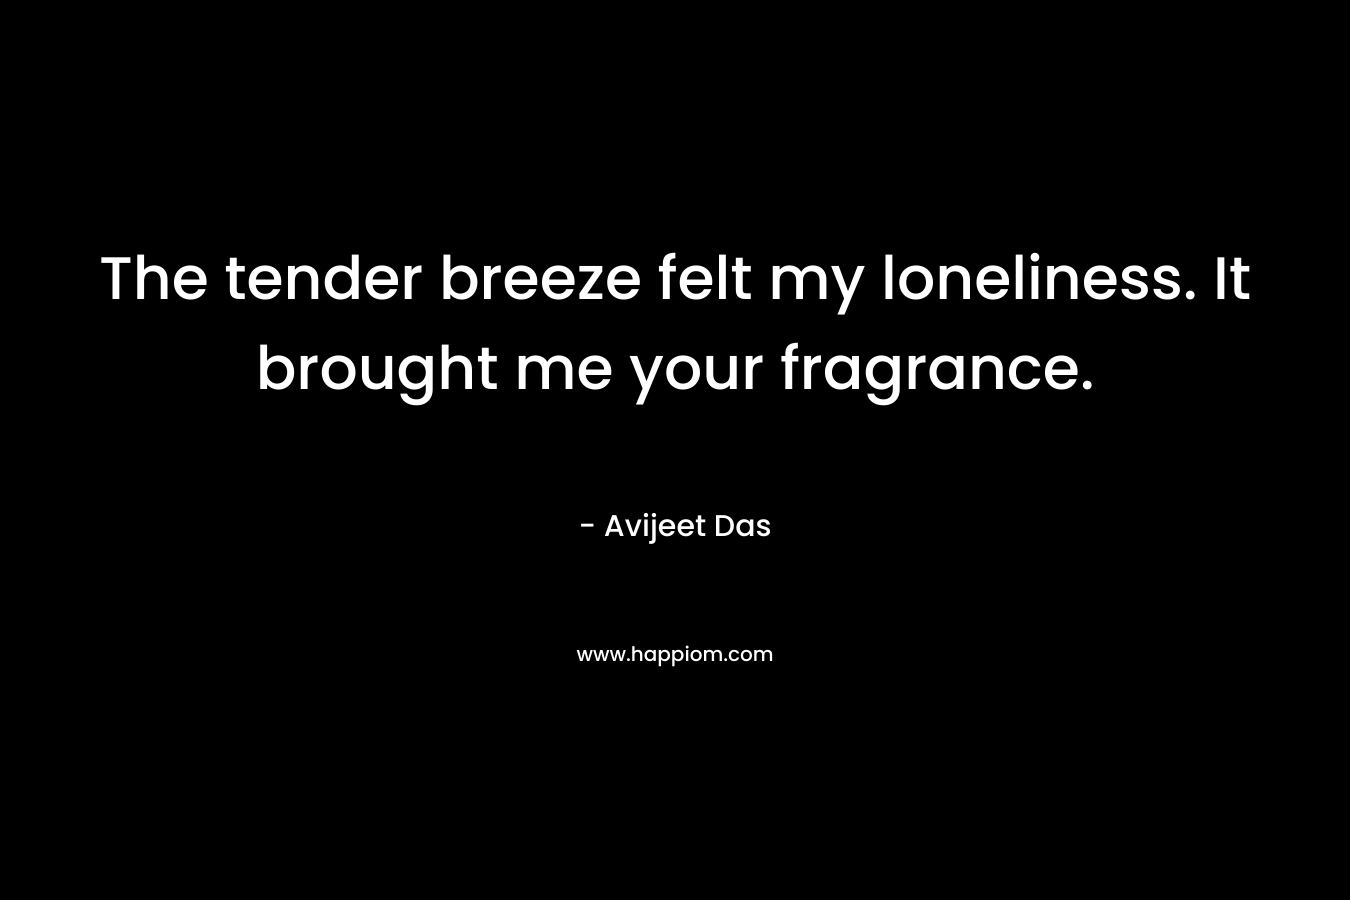 The tender breeze felt my loneliness. It brought me your fragrance.